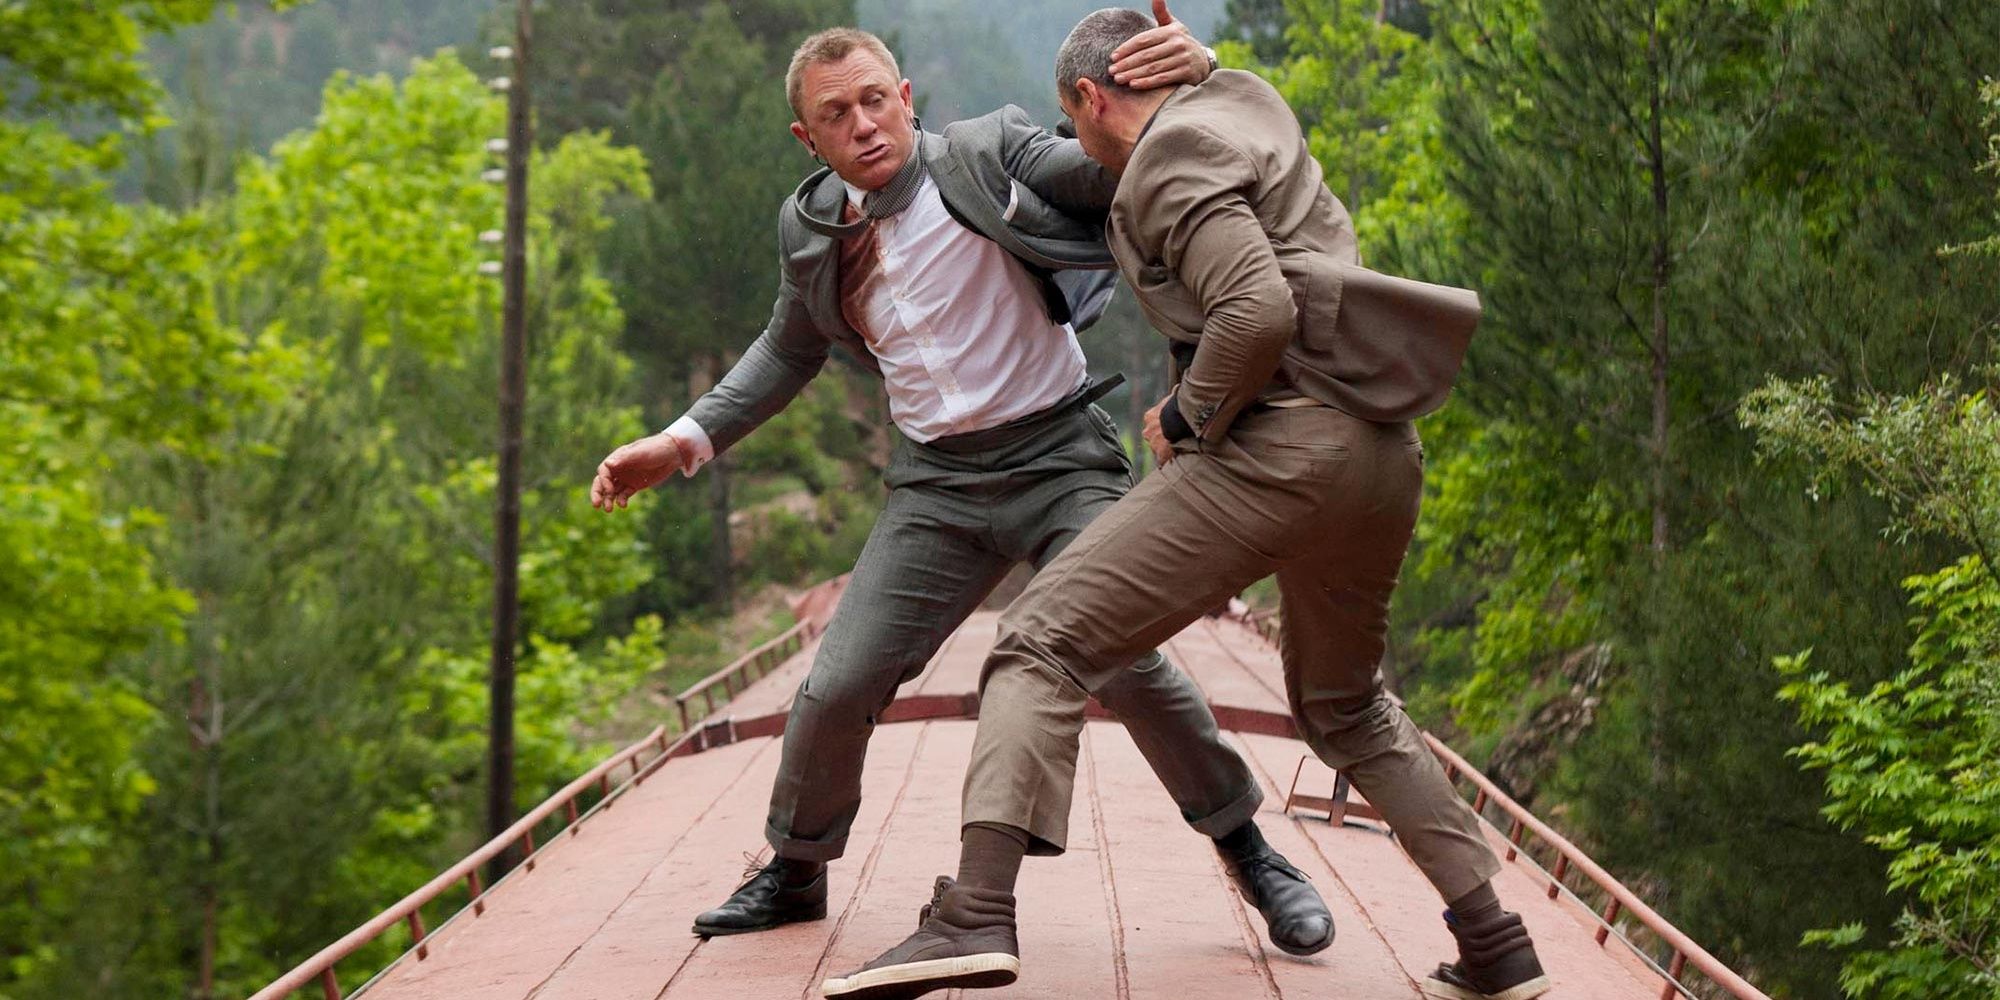 Bond and Patrice in Skyfall